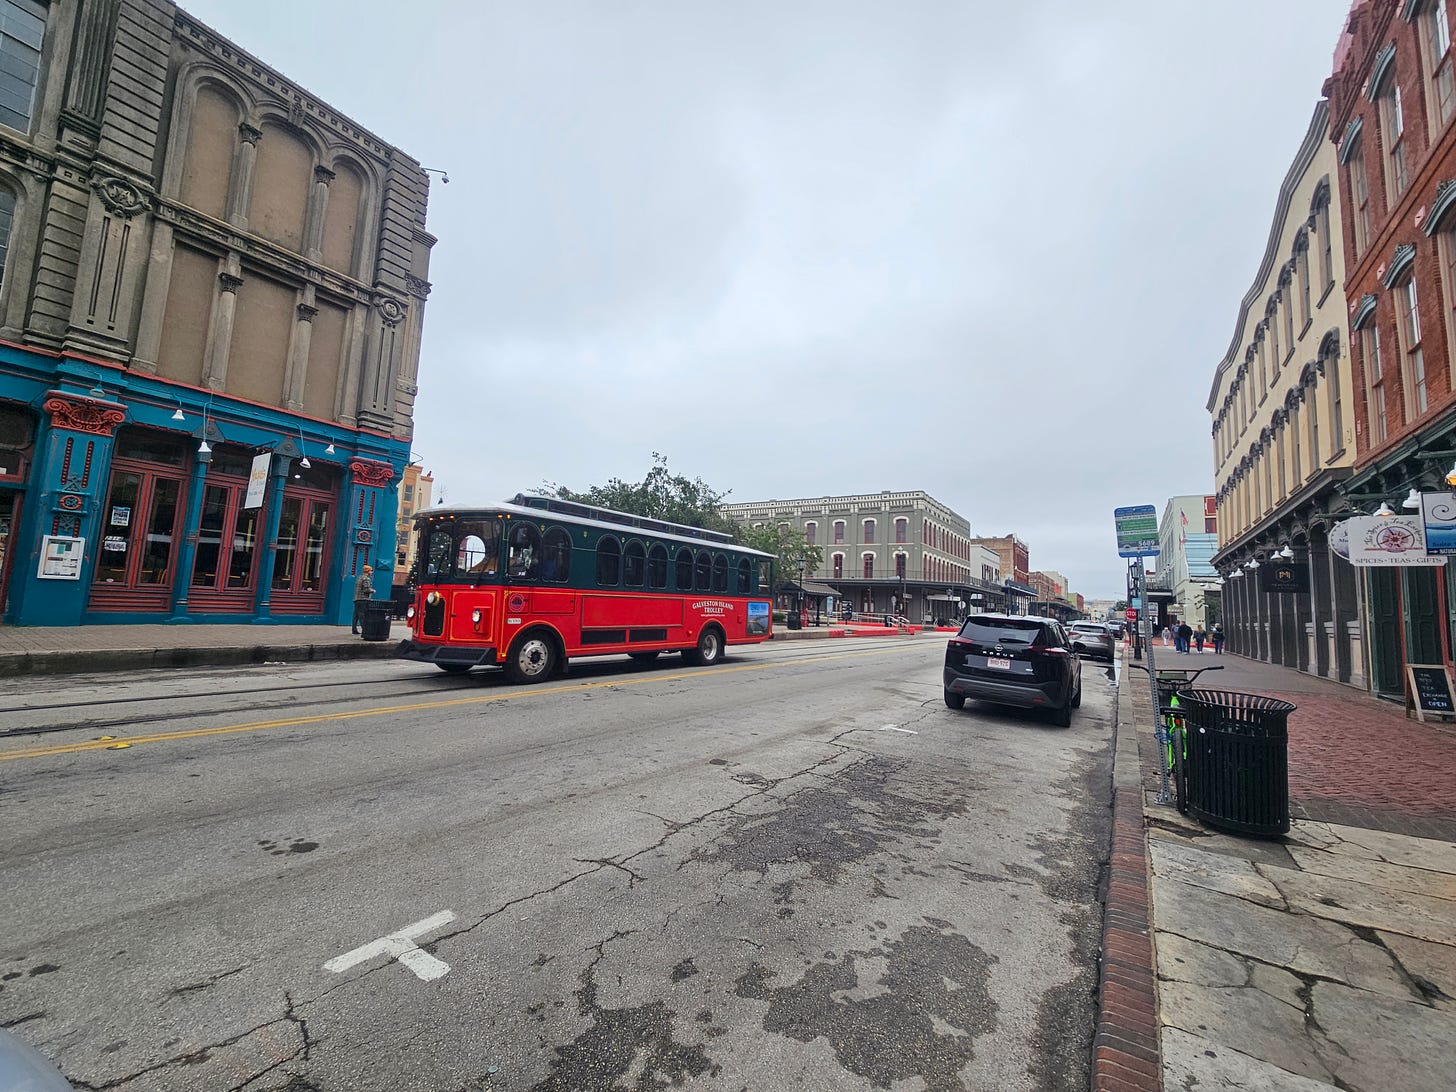 A city trolley as it travels along the Strand in historic Galveston